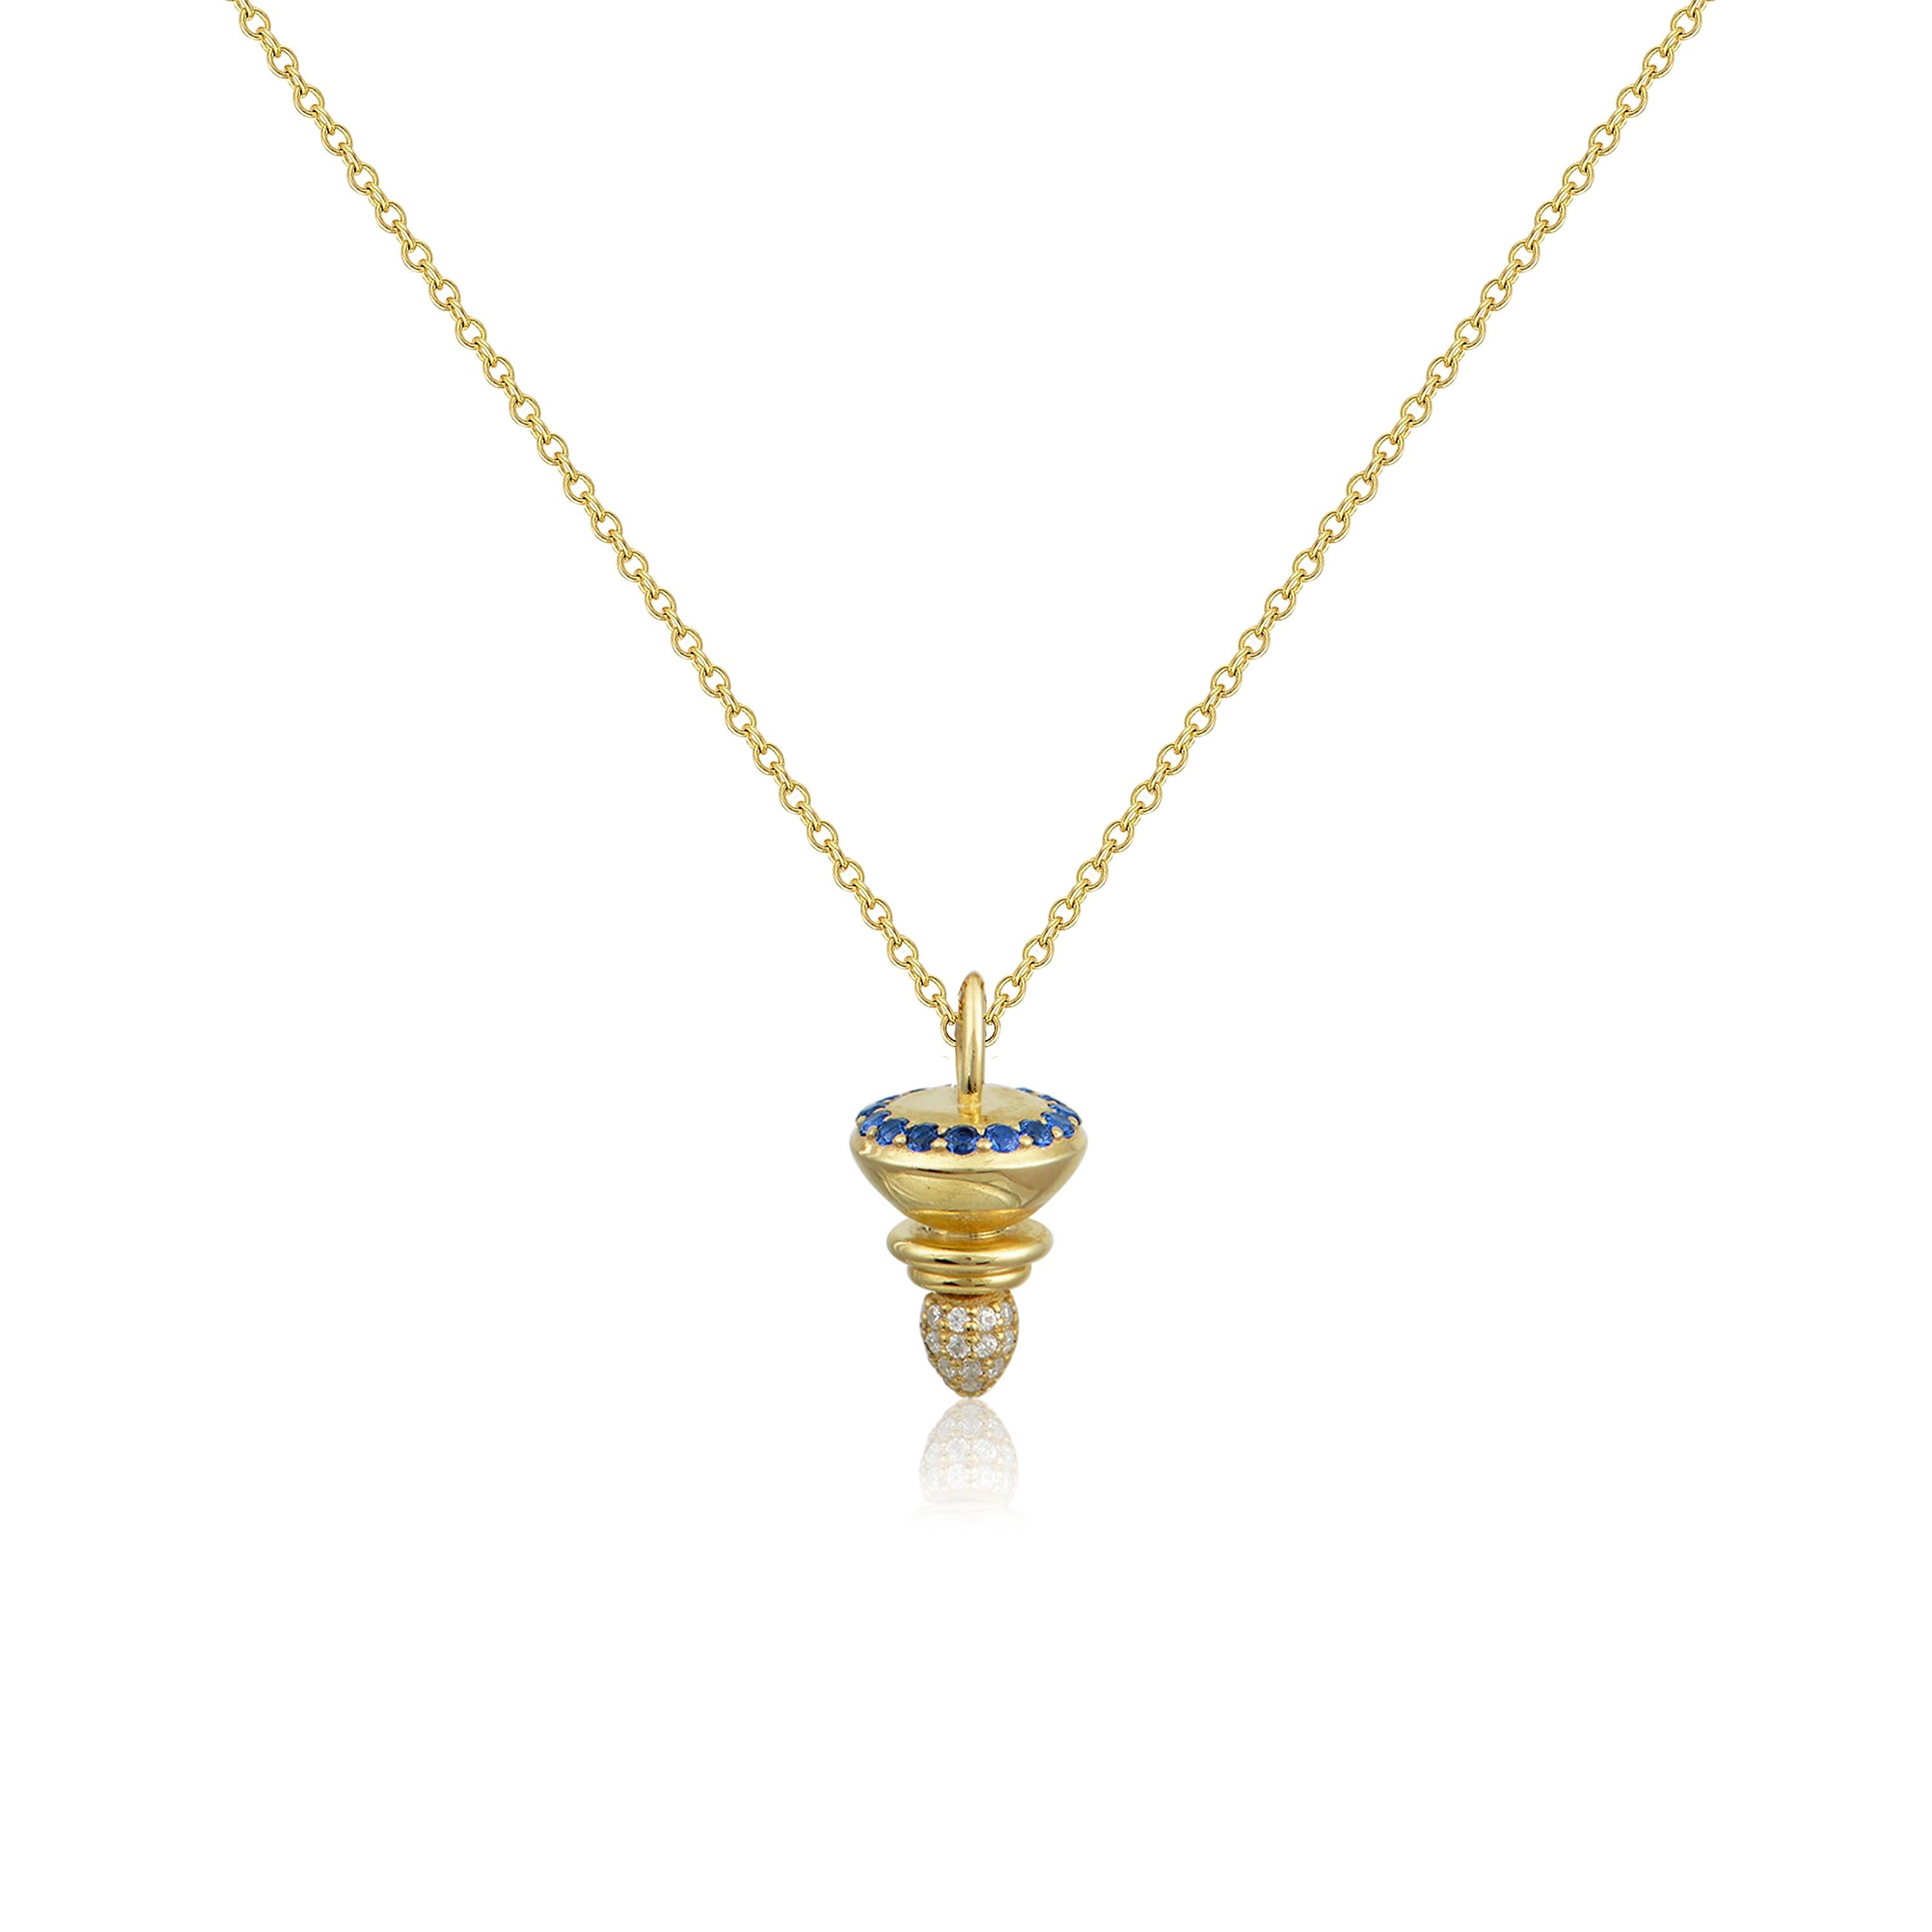 Designer: Alexia Gryllaki

Dimensions: motif L18x10mm, chain 450mm
Weight: approximately 6.5g  (inc. chain)
Barcode: NEX3014


Totem interchangeable pendant in 18 karat yellow gold with a 450mm chain, set with round brilliant-cut diamonds approx.